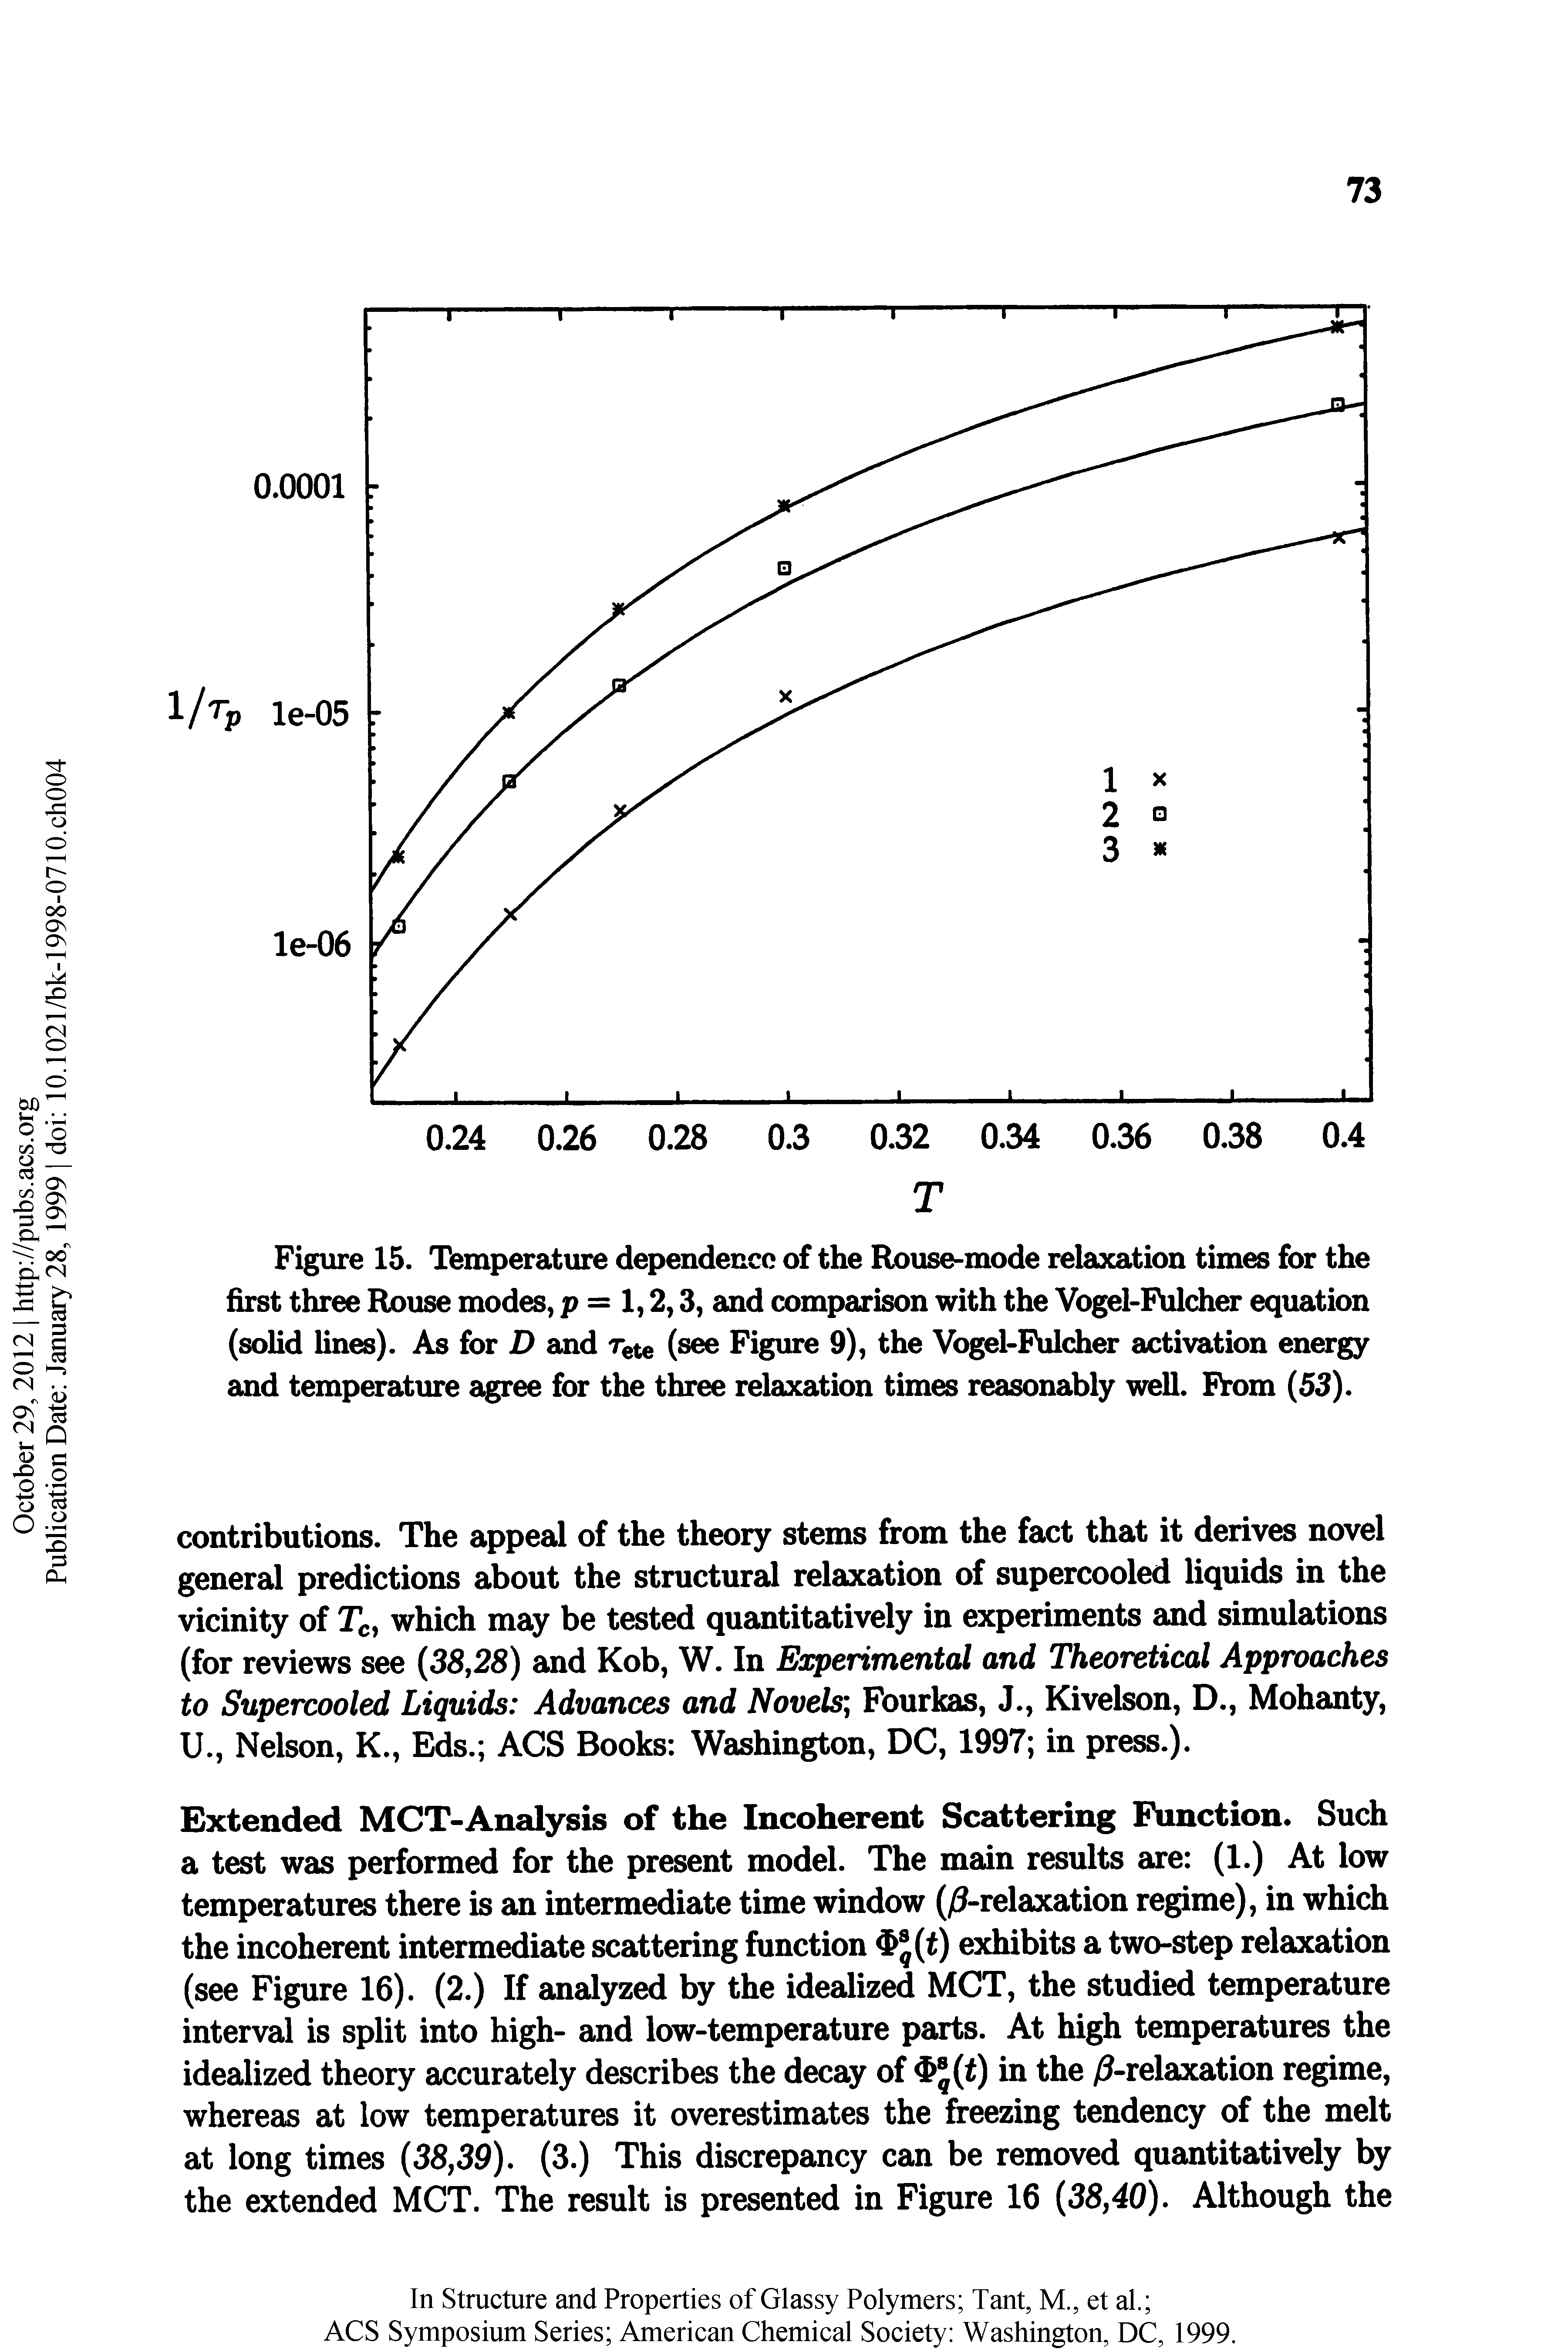 Figure 15. Temperature dependence of the Rouse-mode relaxation times for the first three Rouse modes, p = 1,2,3, and comparison with the Vogel-Rilcher equation (solid lines). As for D and Tete (see Figure 9), the Vogel-Fulcher activation energy and temperature agree for the three relaxation times reasonably well. FVom (53).